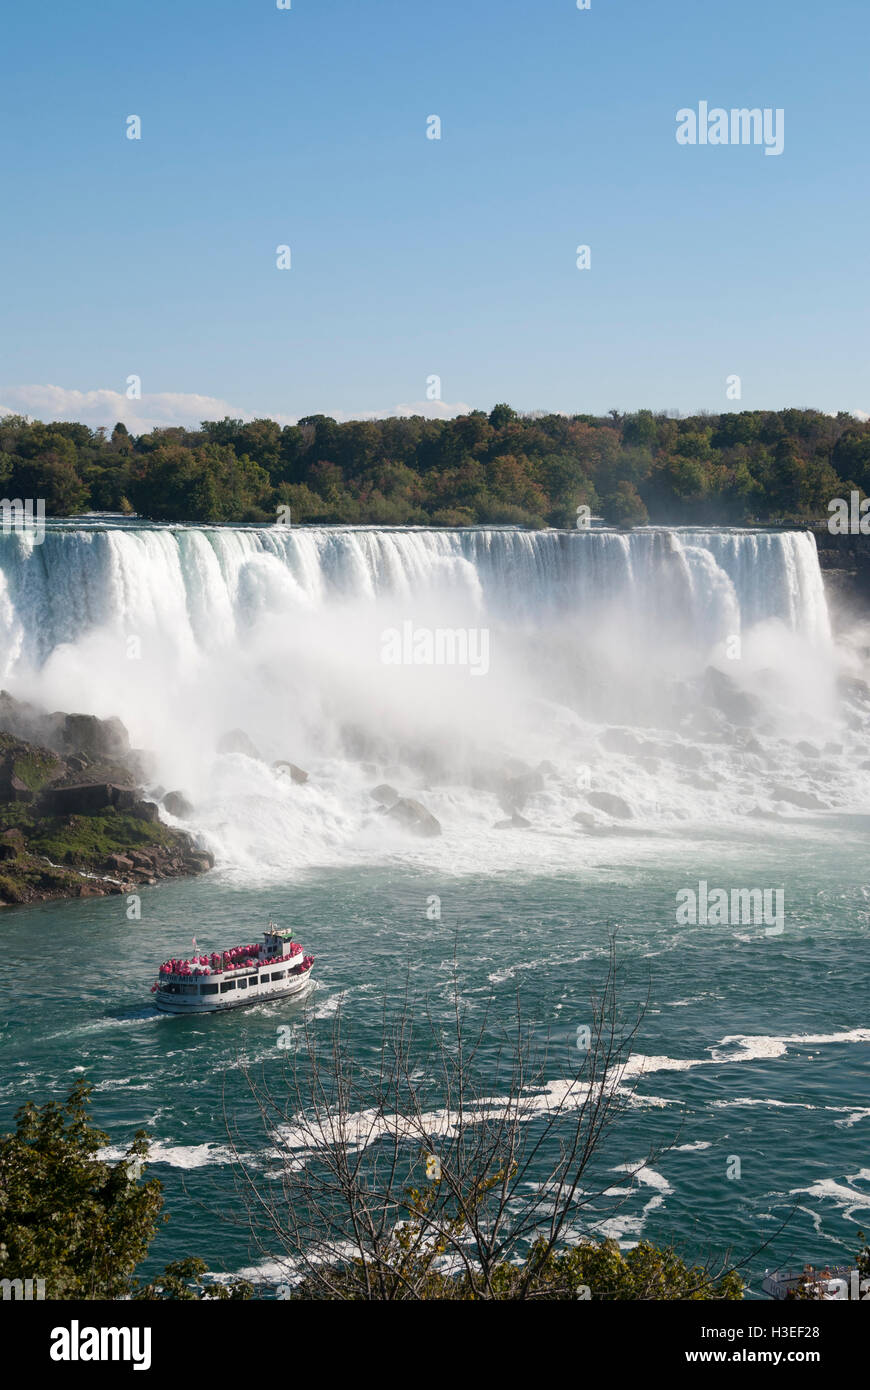 The Maid of the Mist approaches the American Falls as seen from the Canadian side of Niagara Falls Canada Stock Photo